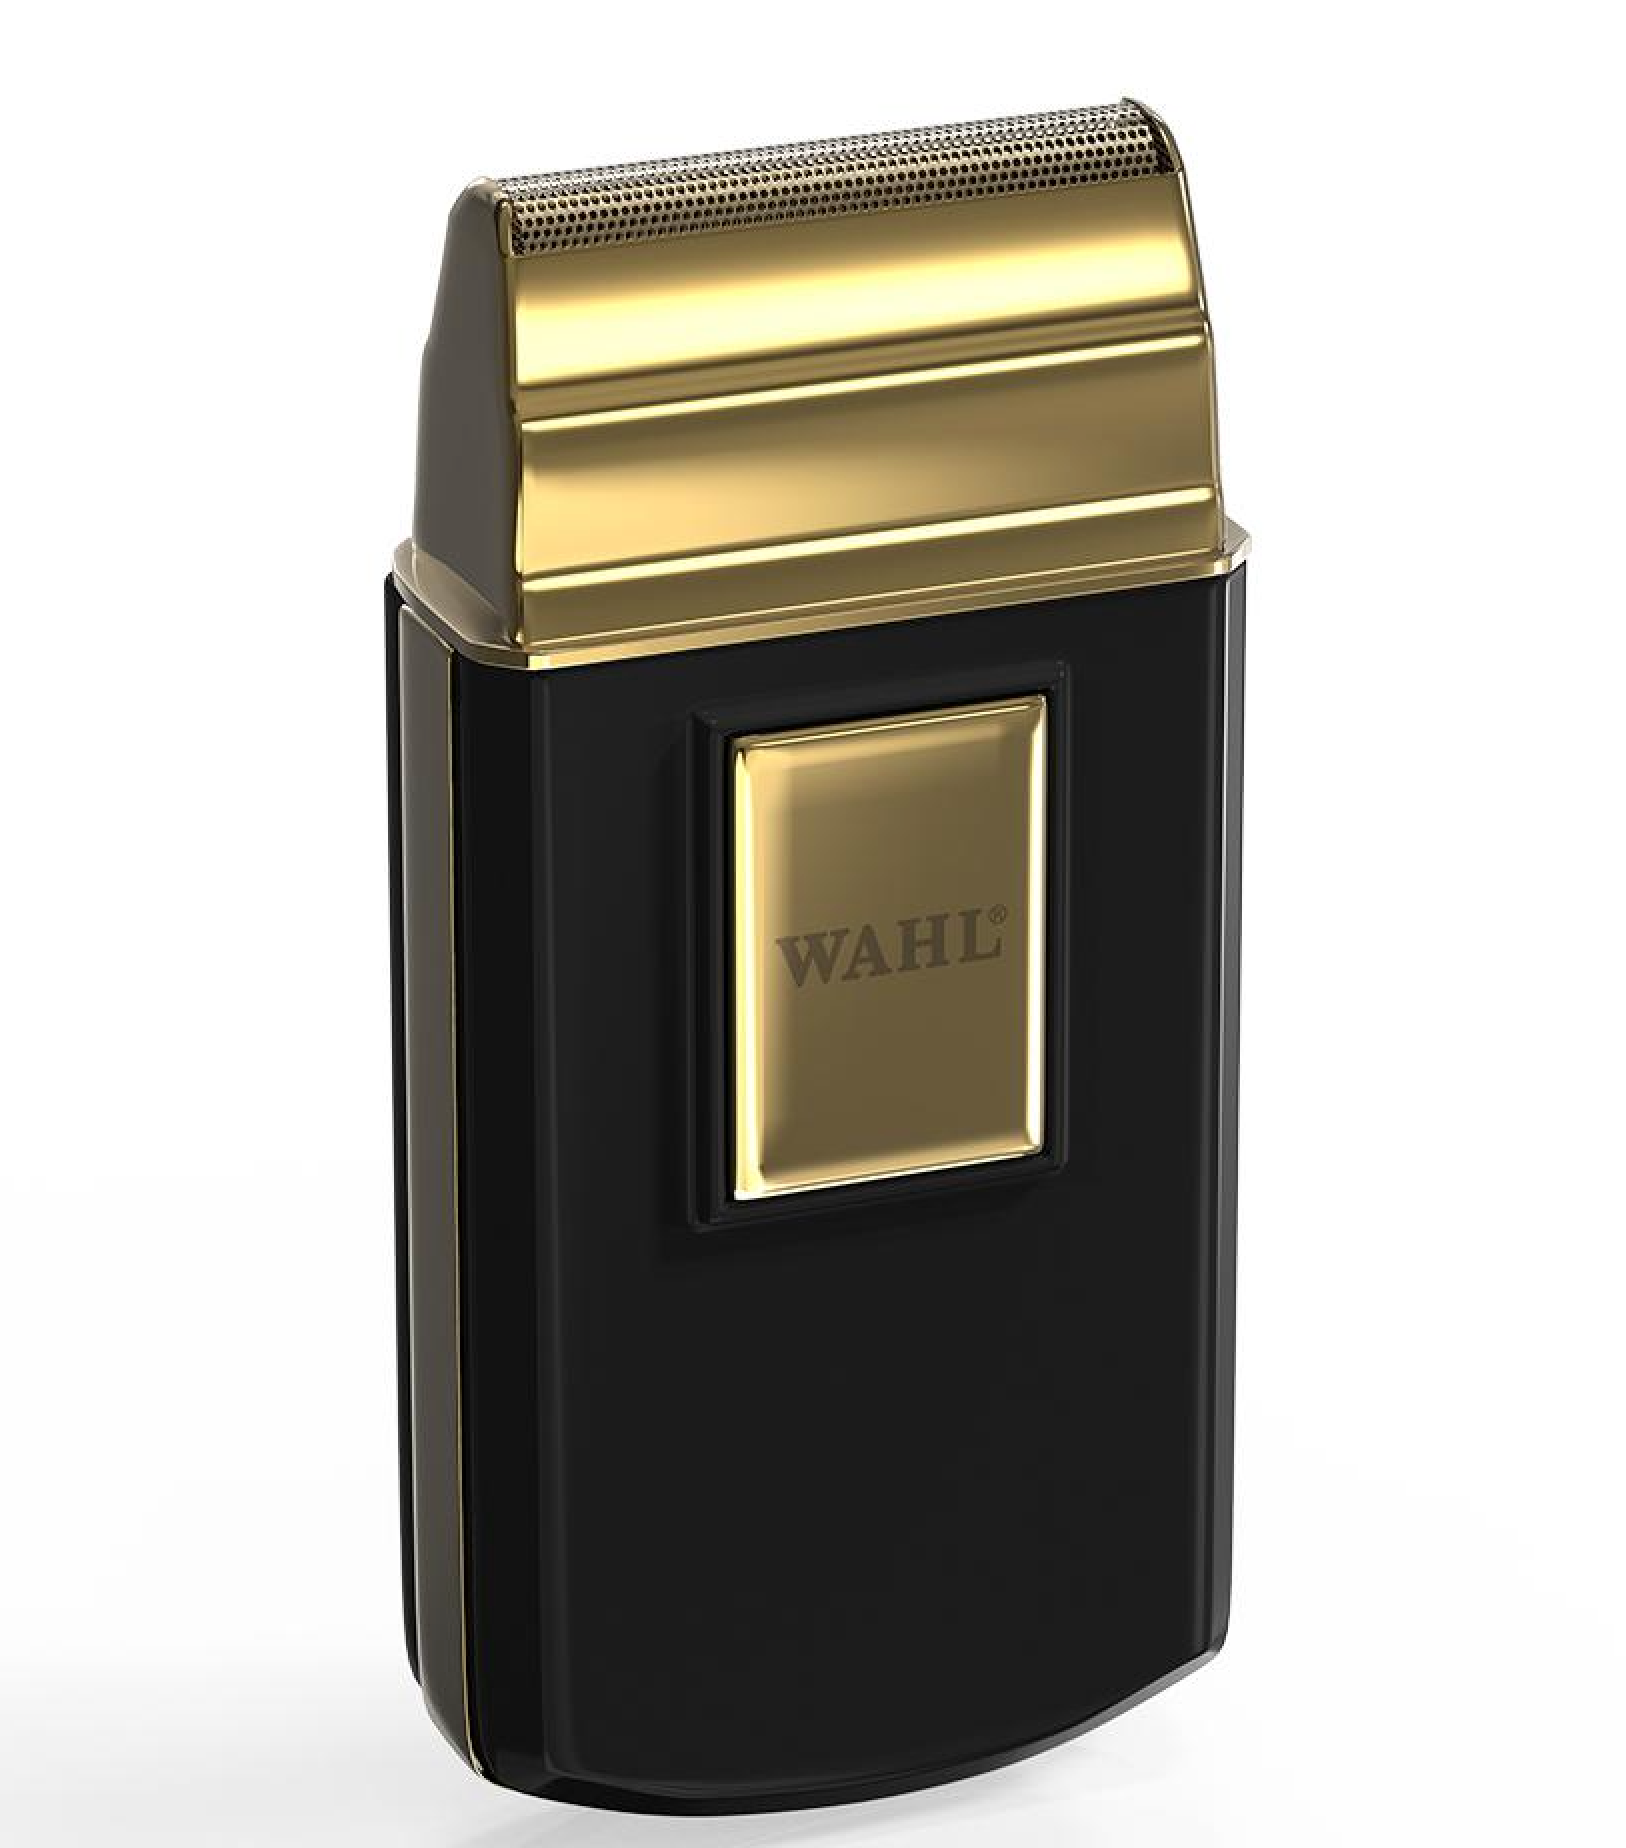 WAHL TRAVEL SHAVER GOLD EDITION - Yolo Cosmetic